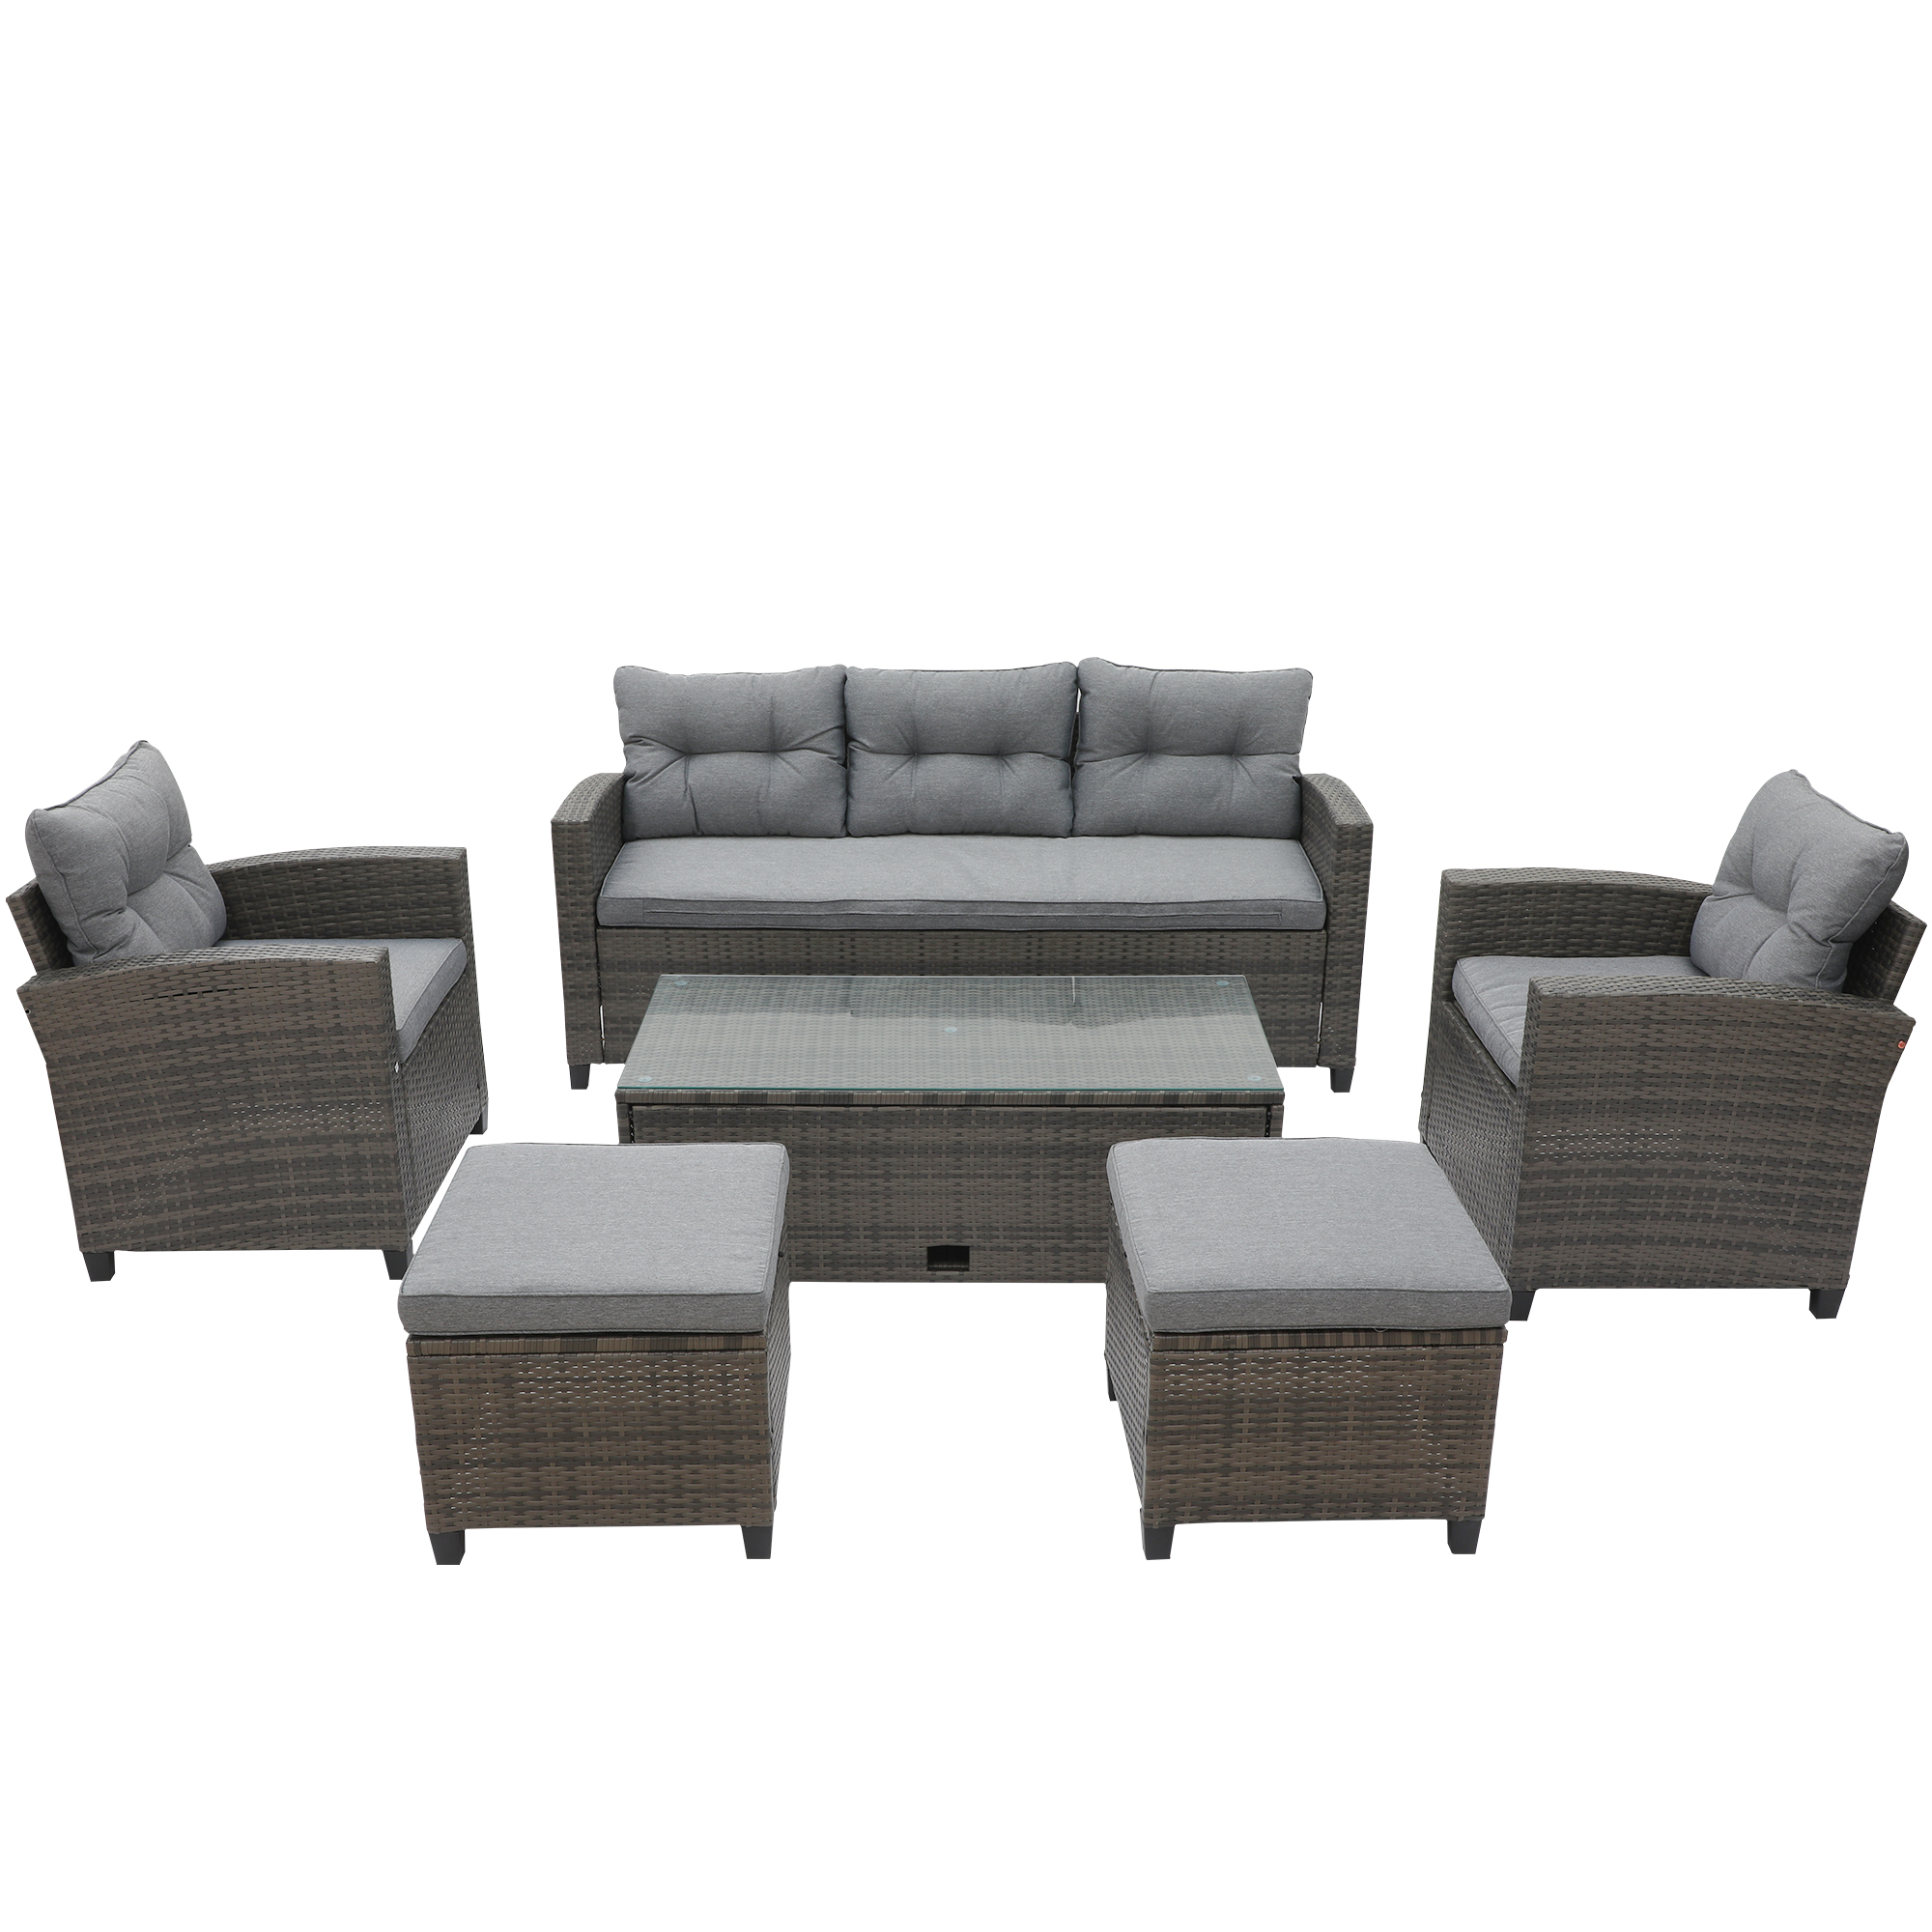 Mondawe Patio Outdoor All Weather Wicker PE Rattan  6 Piece Conversation Sofa Set Sectional Set with Light Grey Cushions